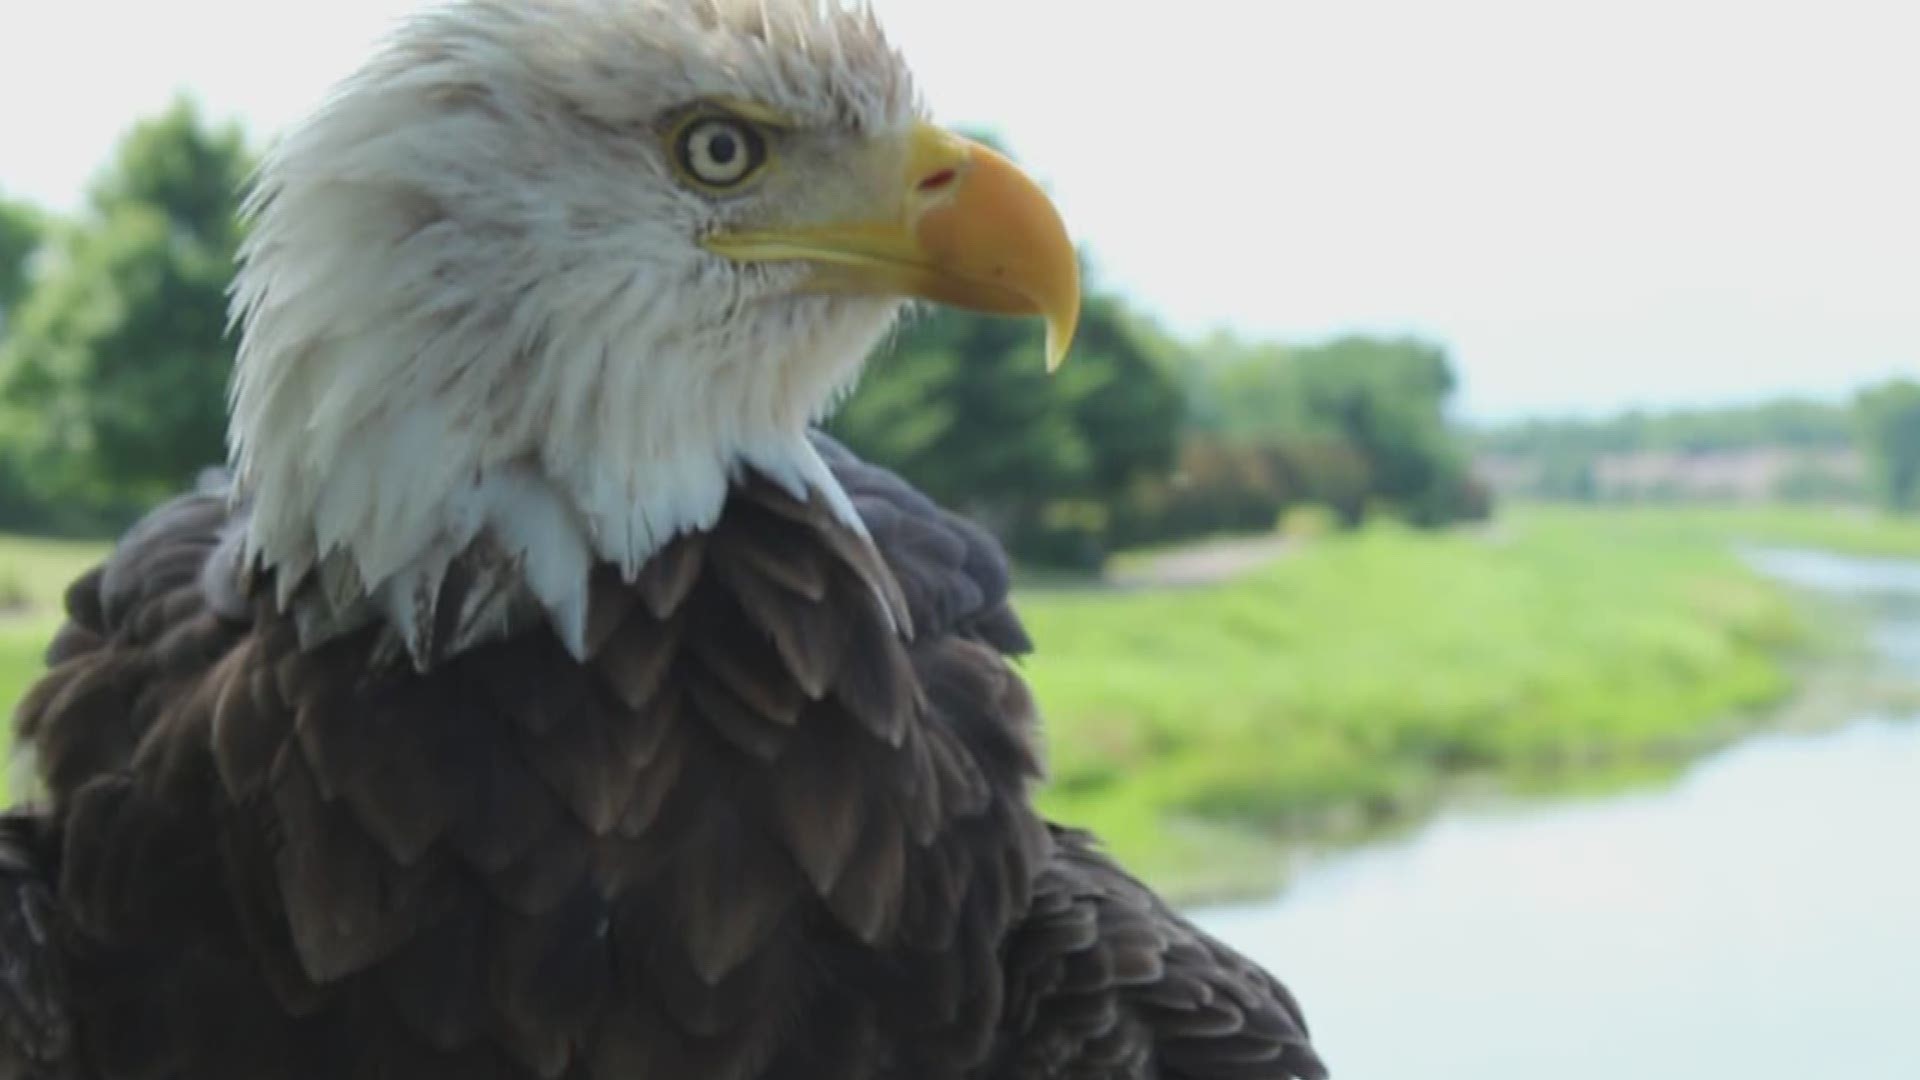 Fishing line and hooks get left behind by fishermen in the Little Pigeon River, which bald eagles accidentally eat, along with other trash. It could kill them.